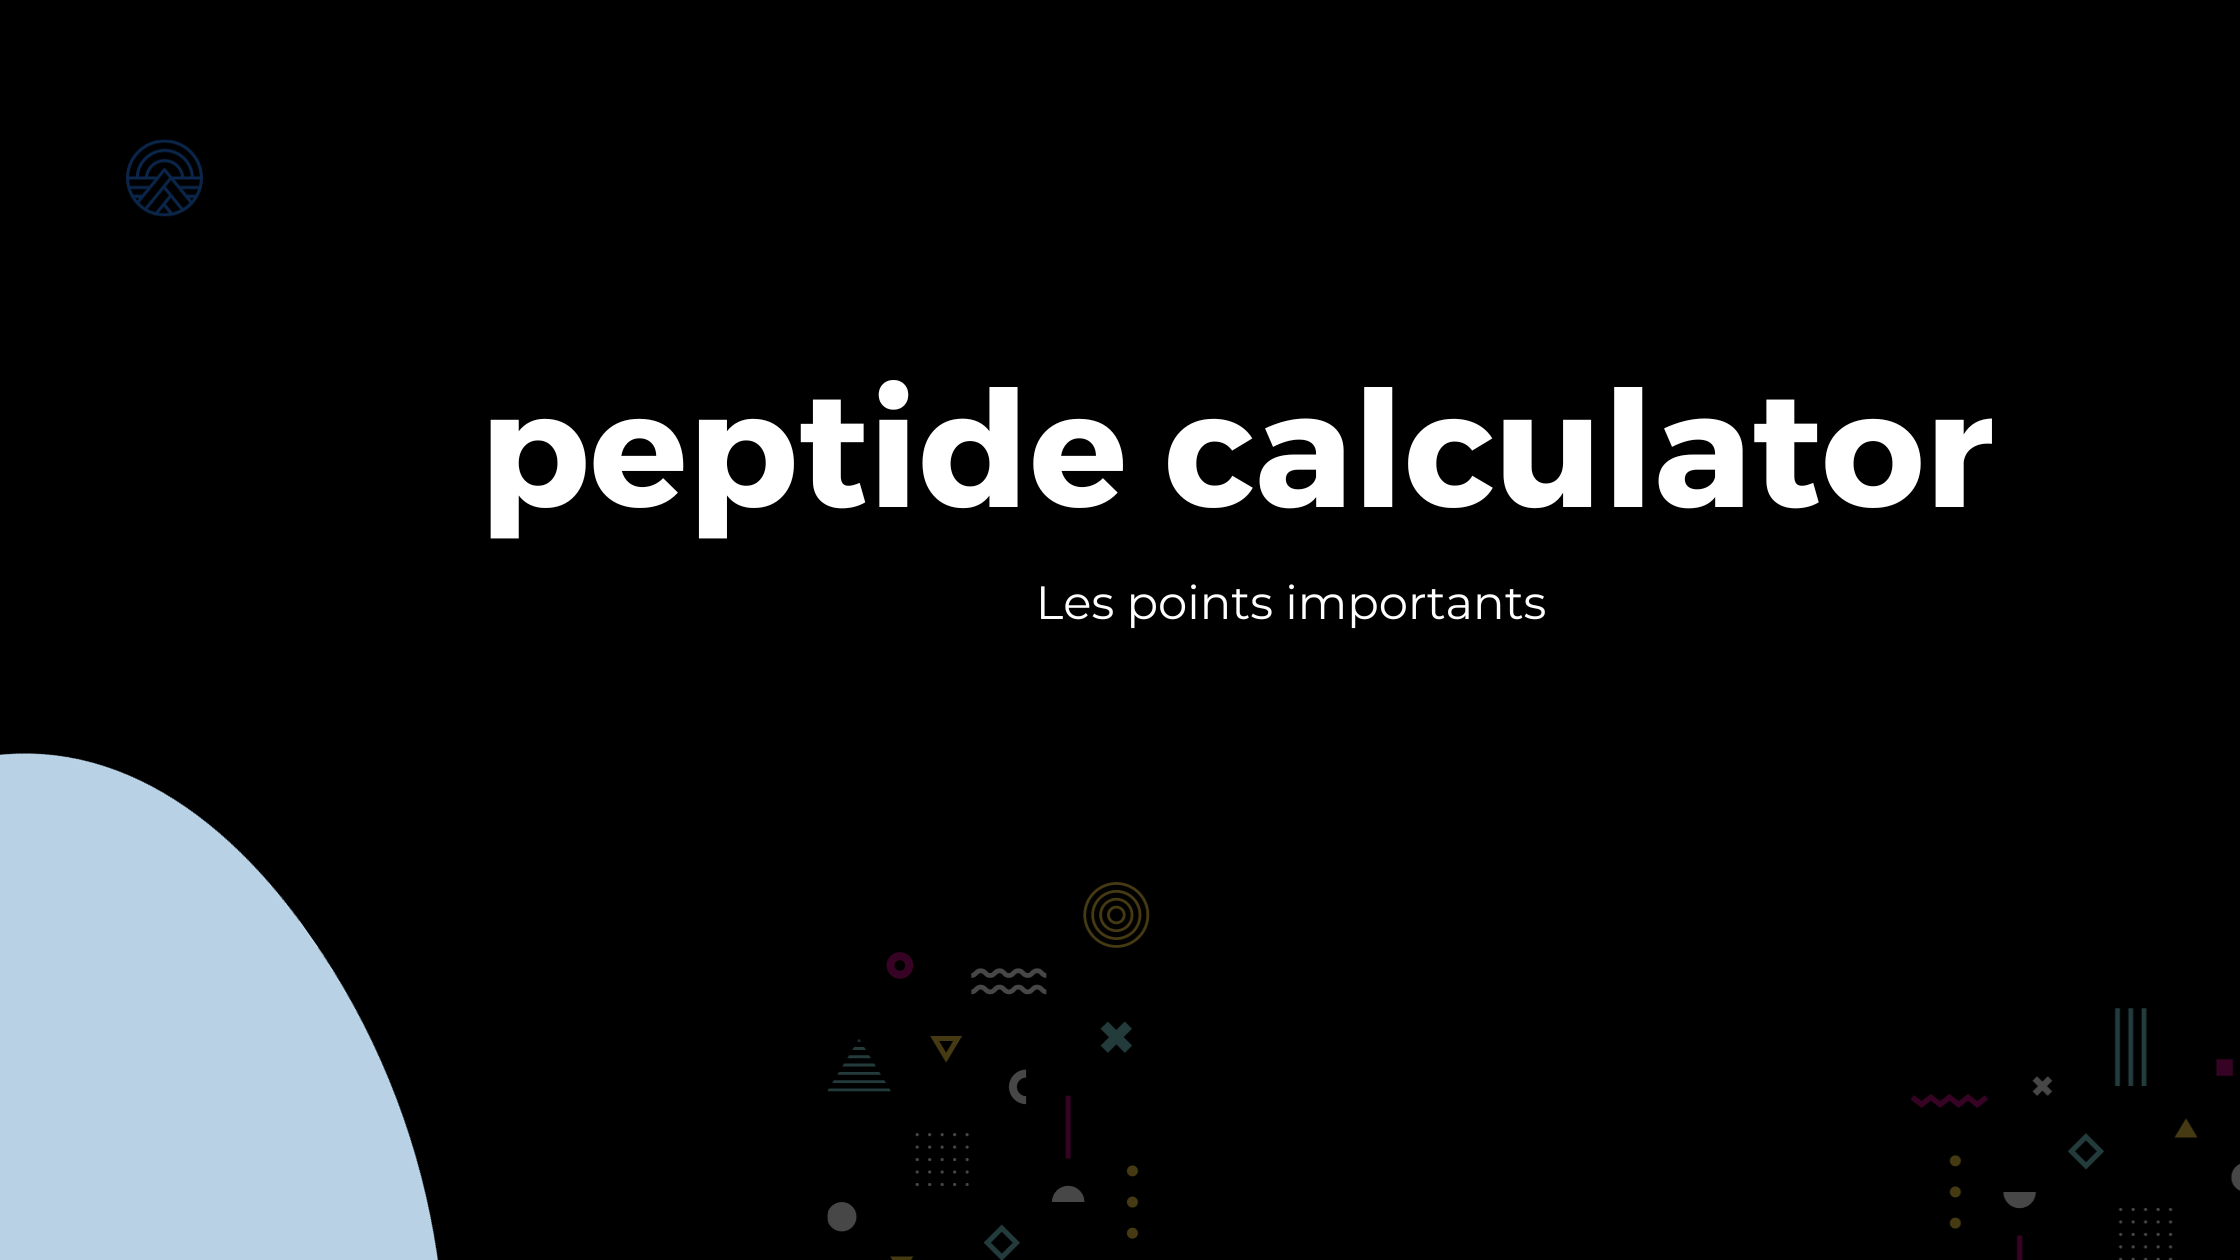 peptide calculator | Les points importants